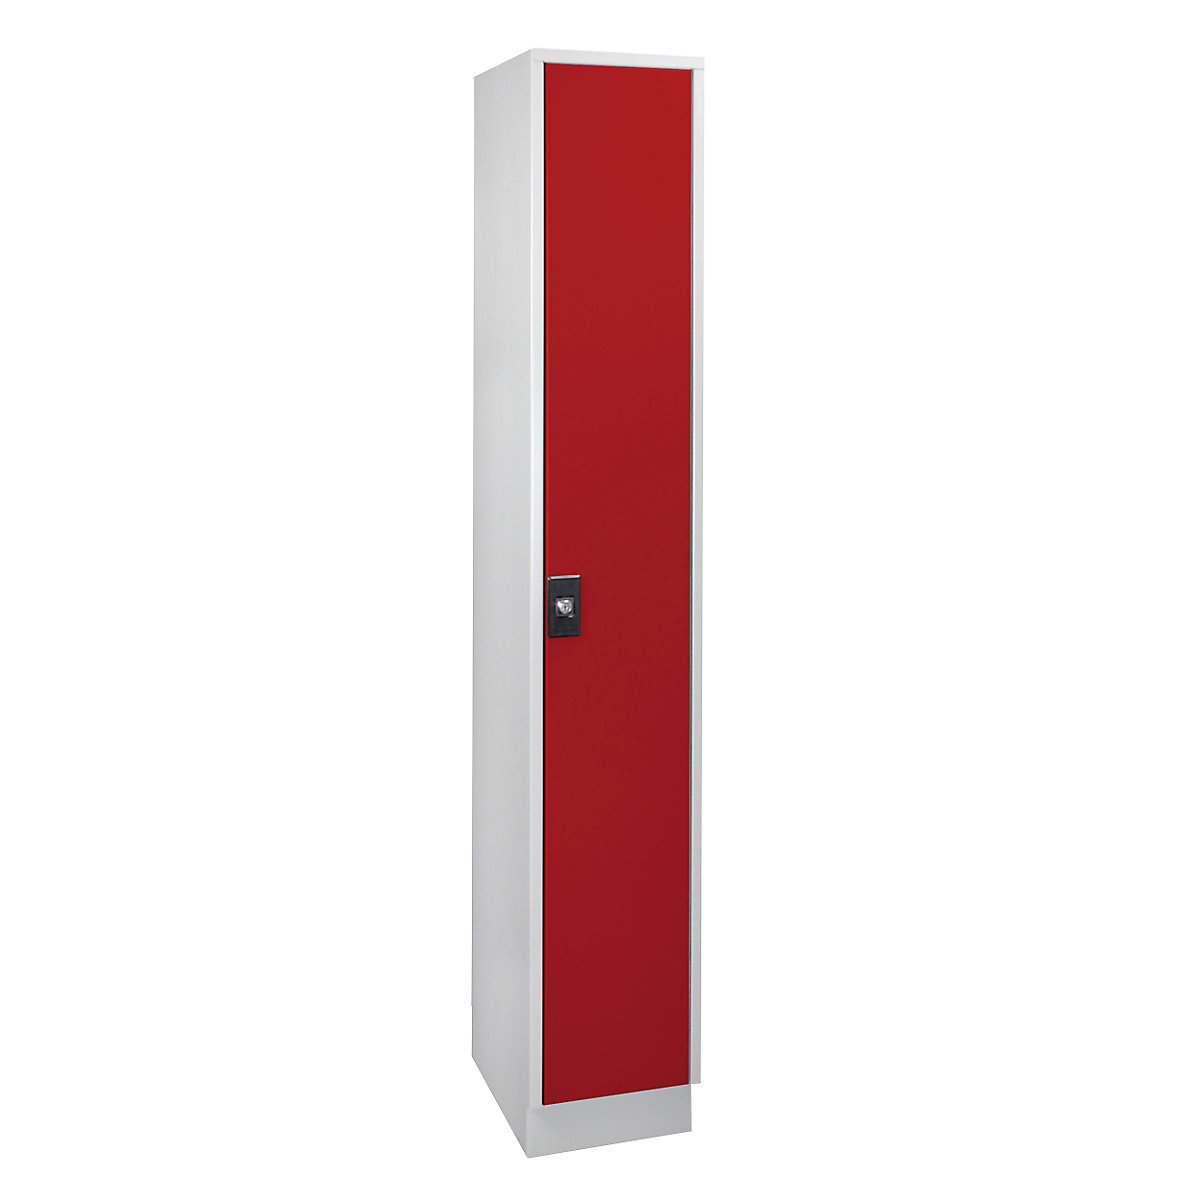 Cloakroom locker – Wolf, 1 x 300 mm wide compartment, light grey / flame red-6